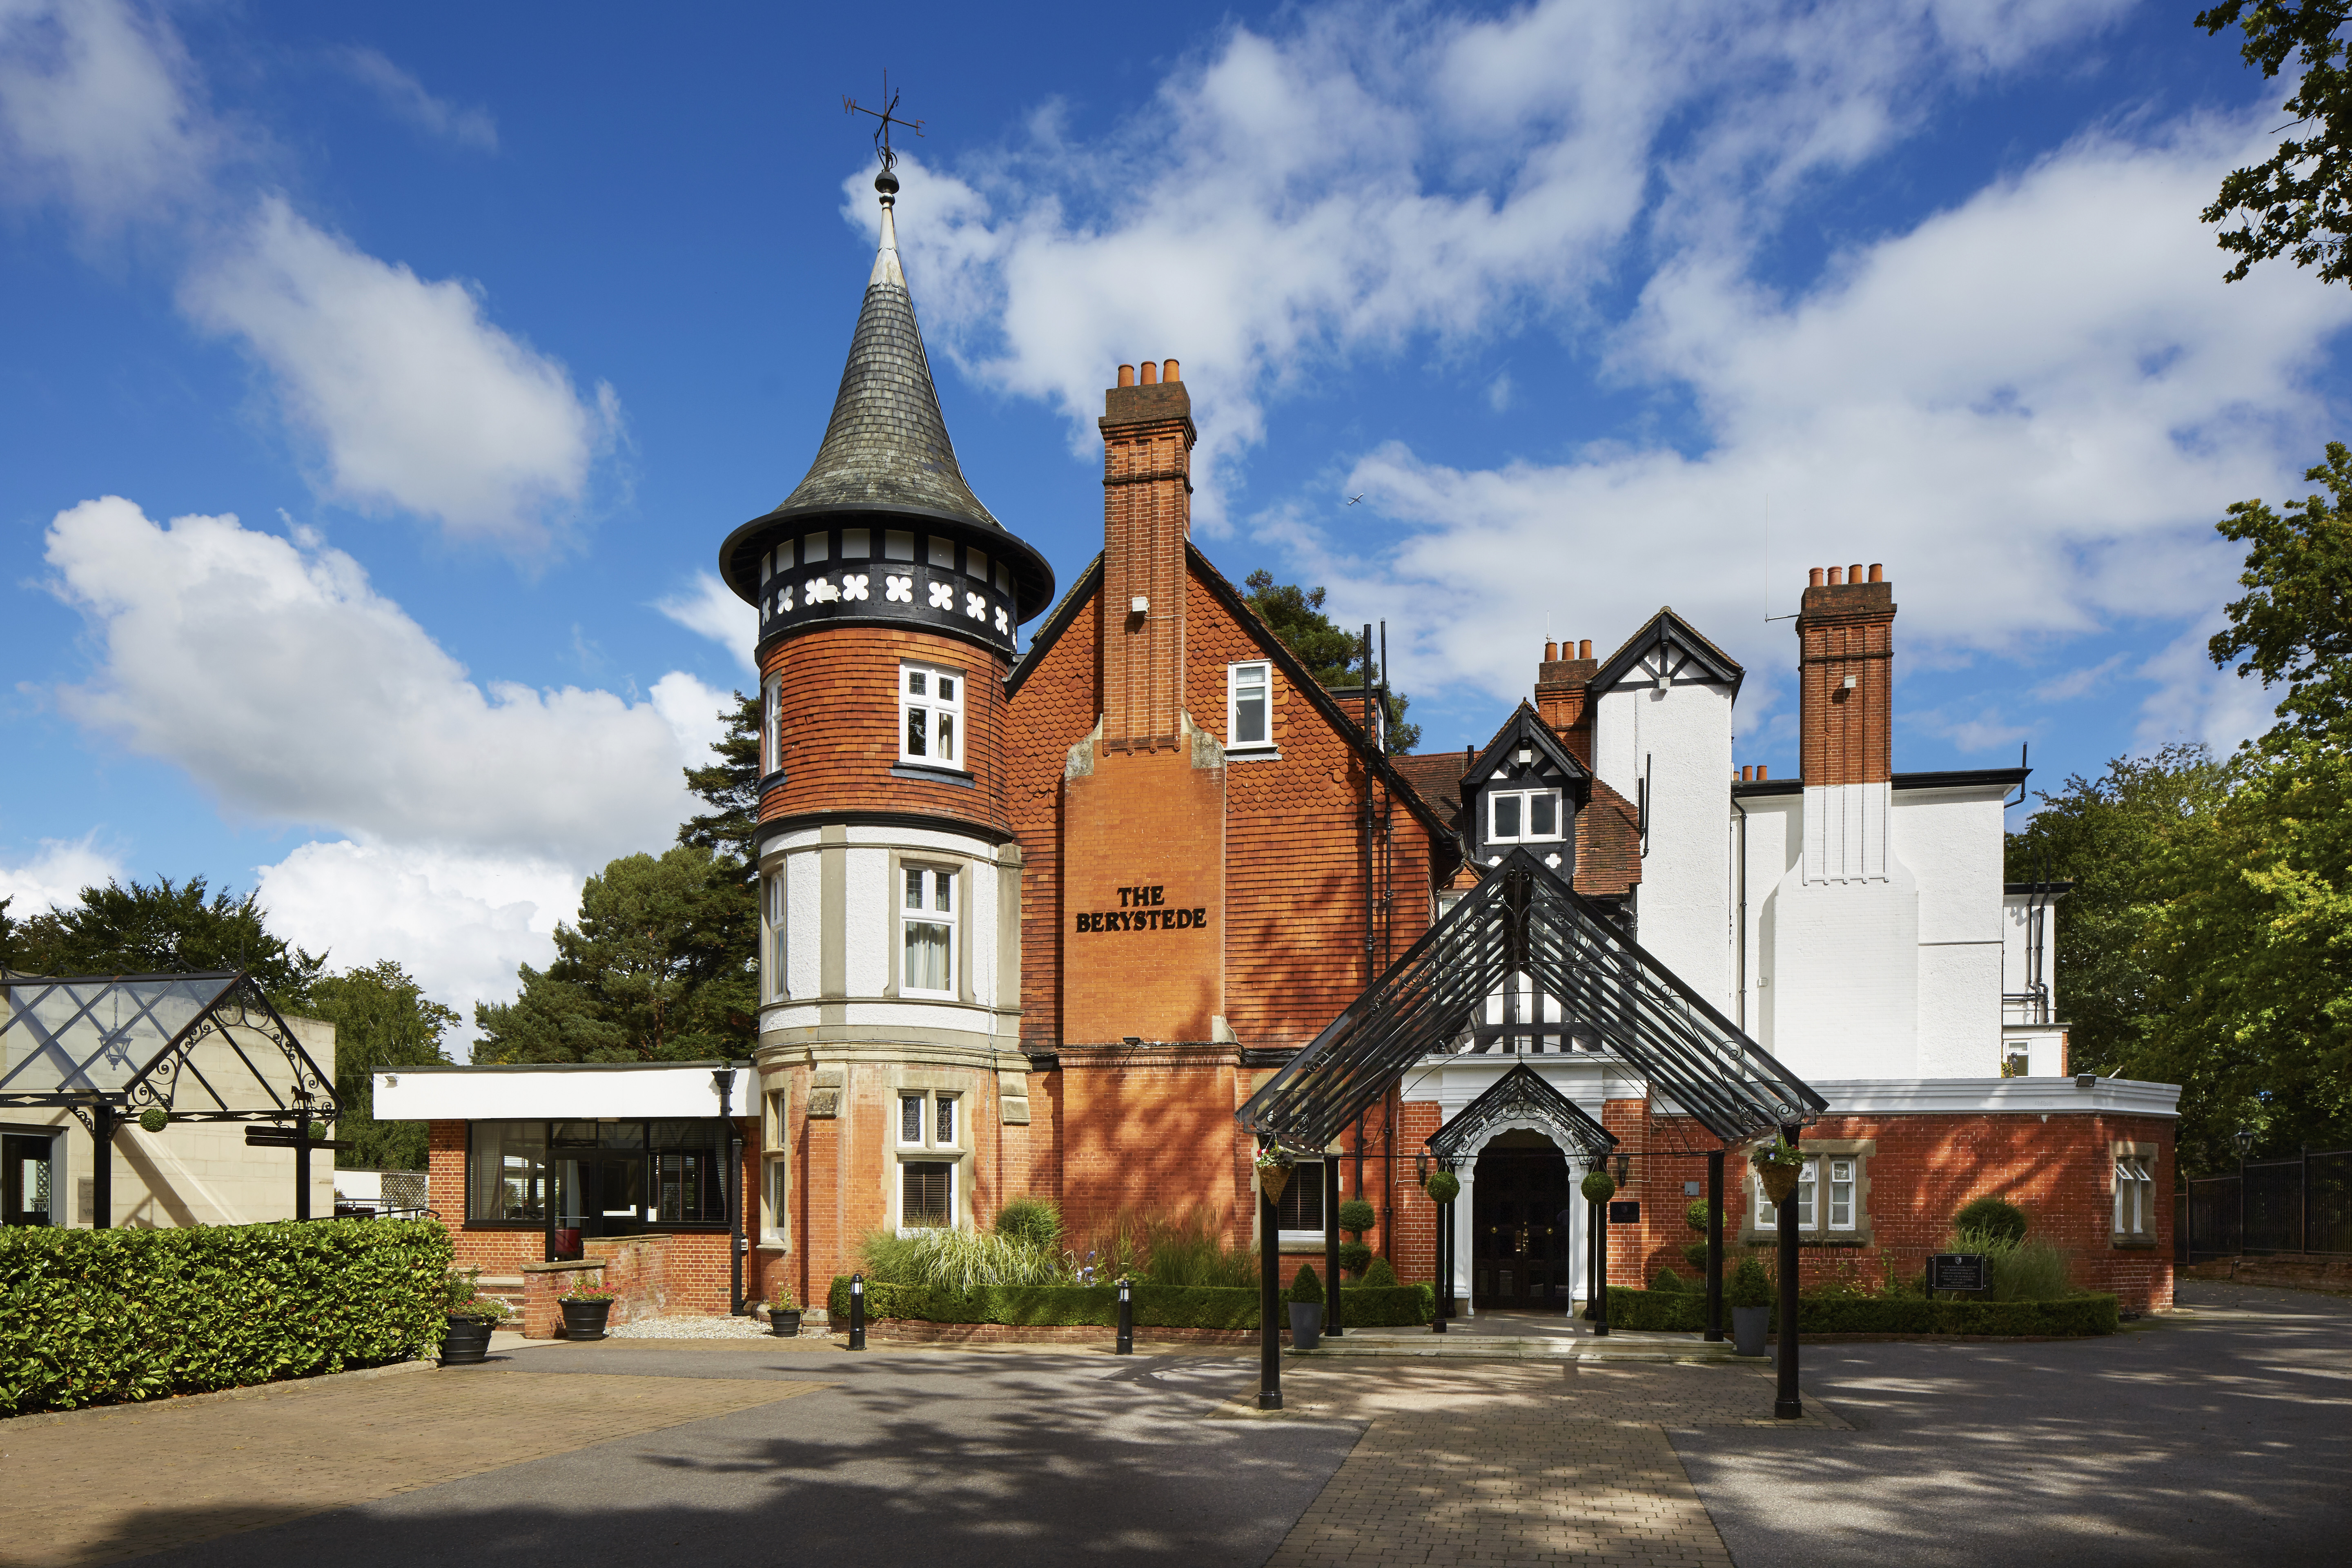 1 Night The Essential Spa Break For Two, Macdonald Berystede Hotel And